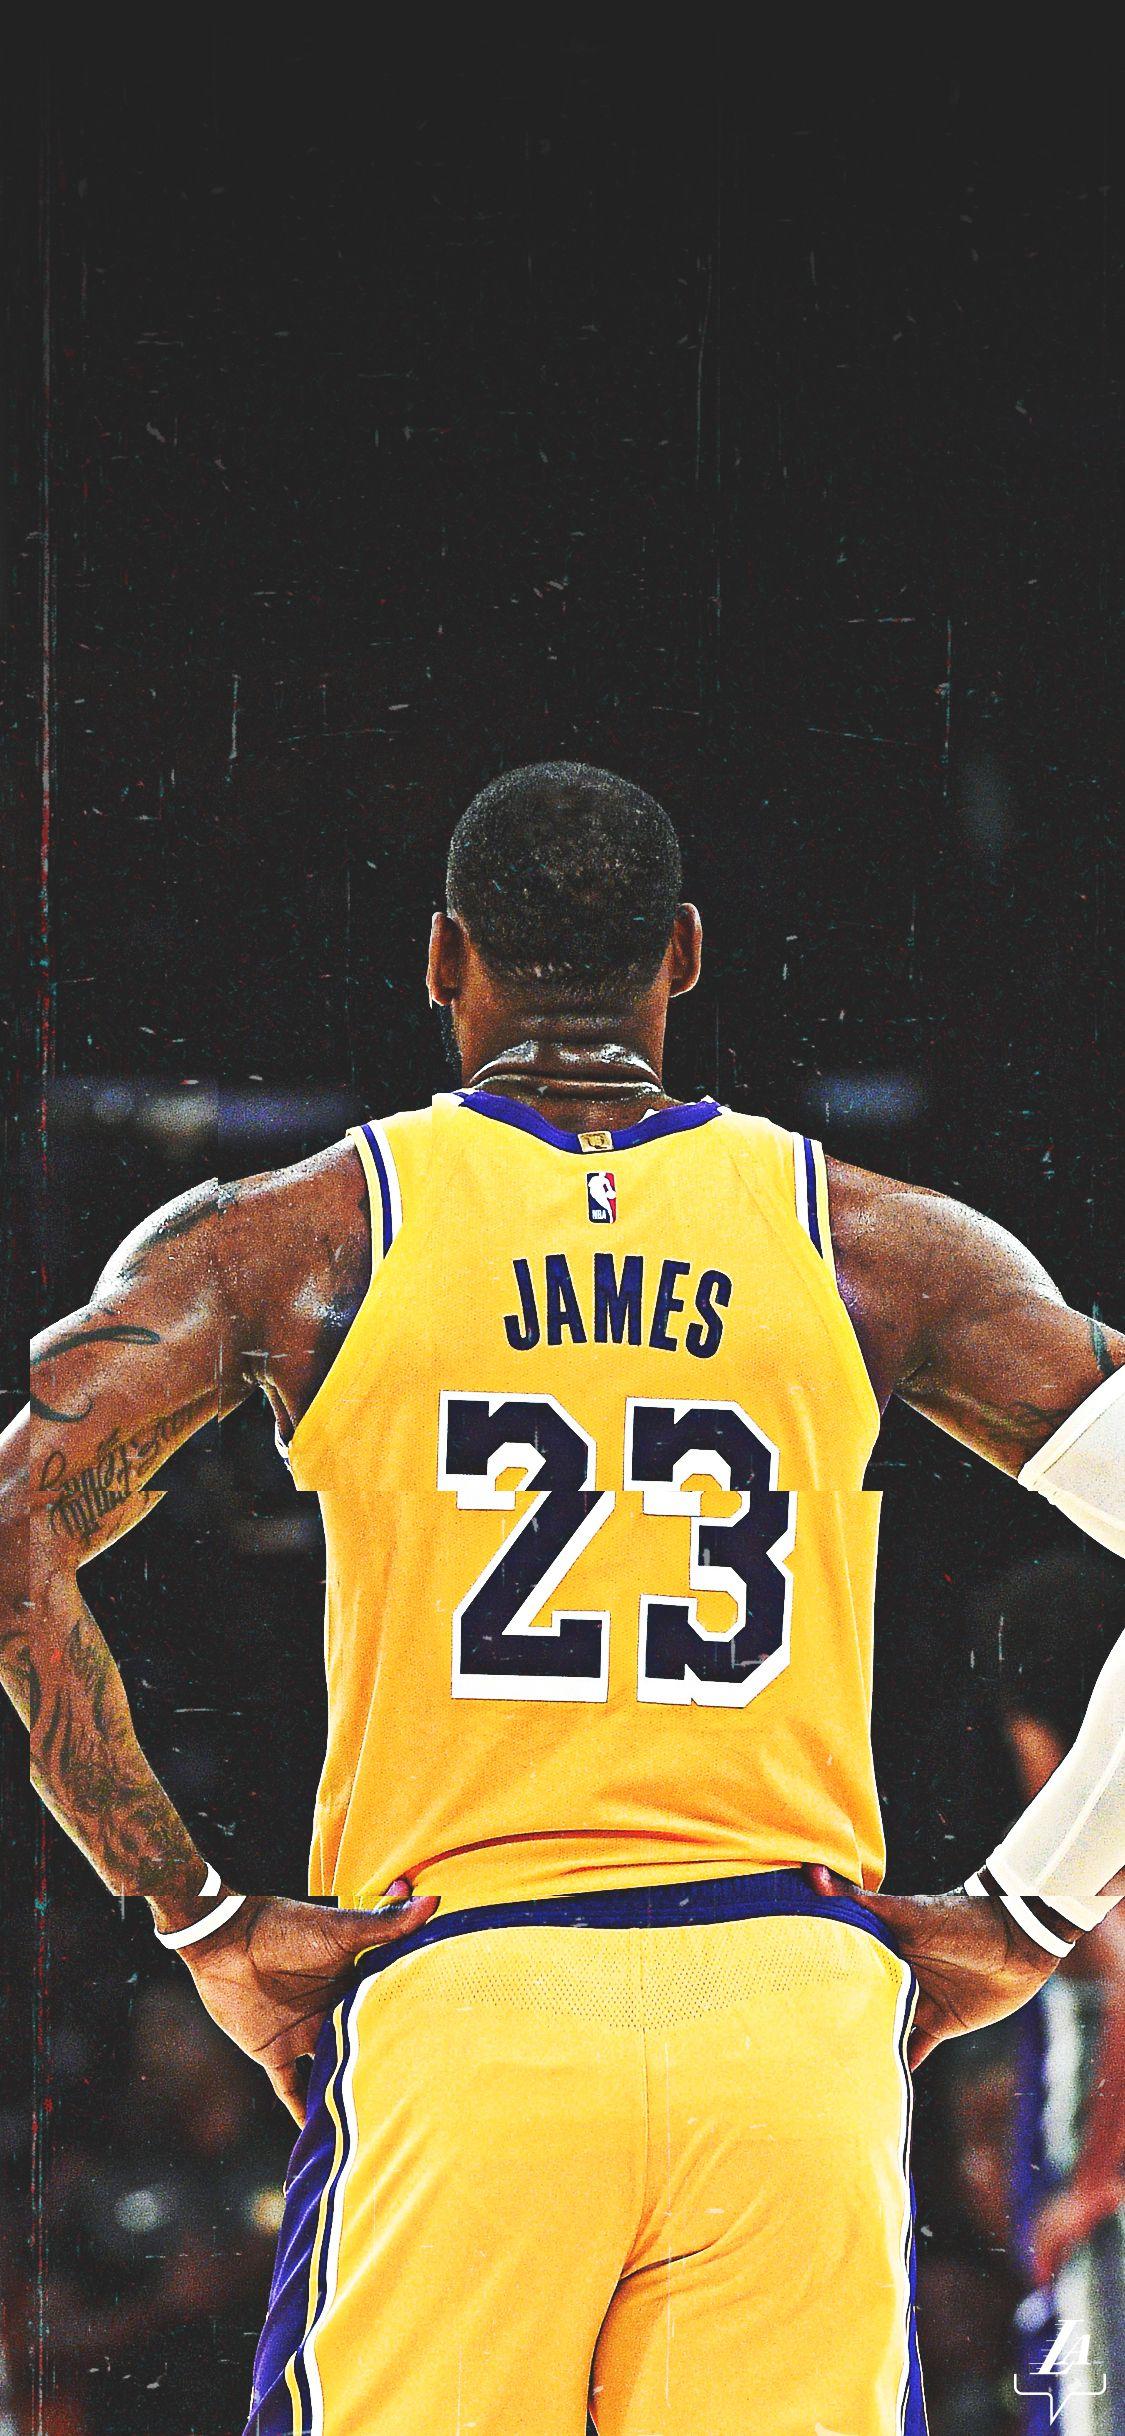 Lebron James Lakers wallpaper for your phone - Los Angeles Lakers, Lebron James